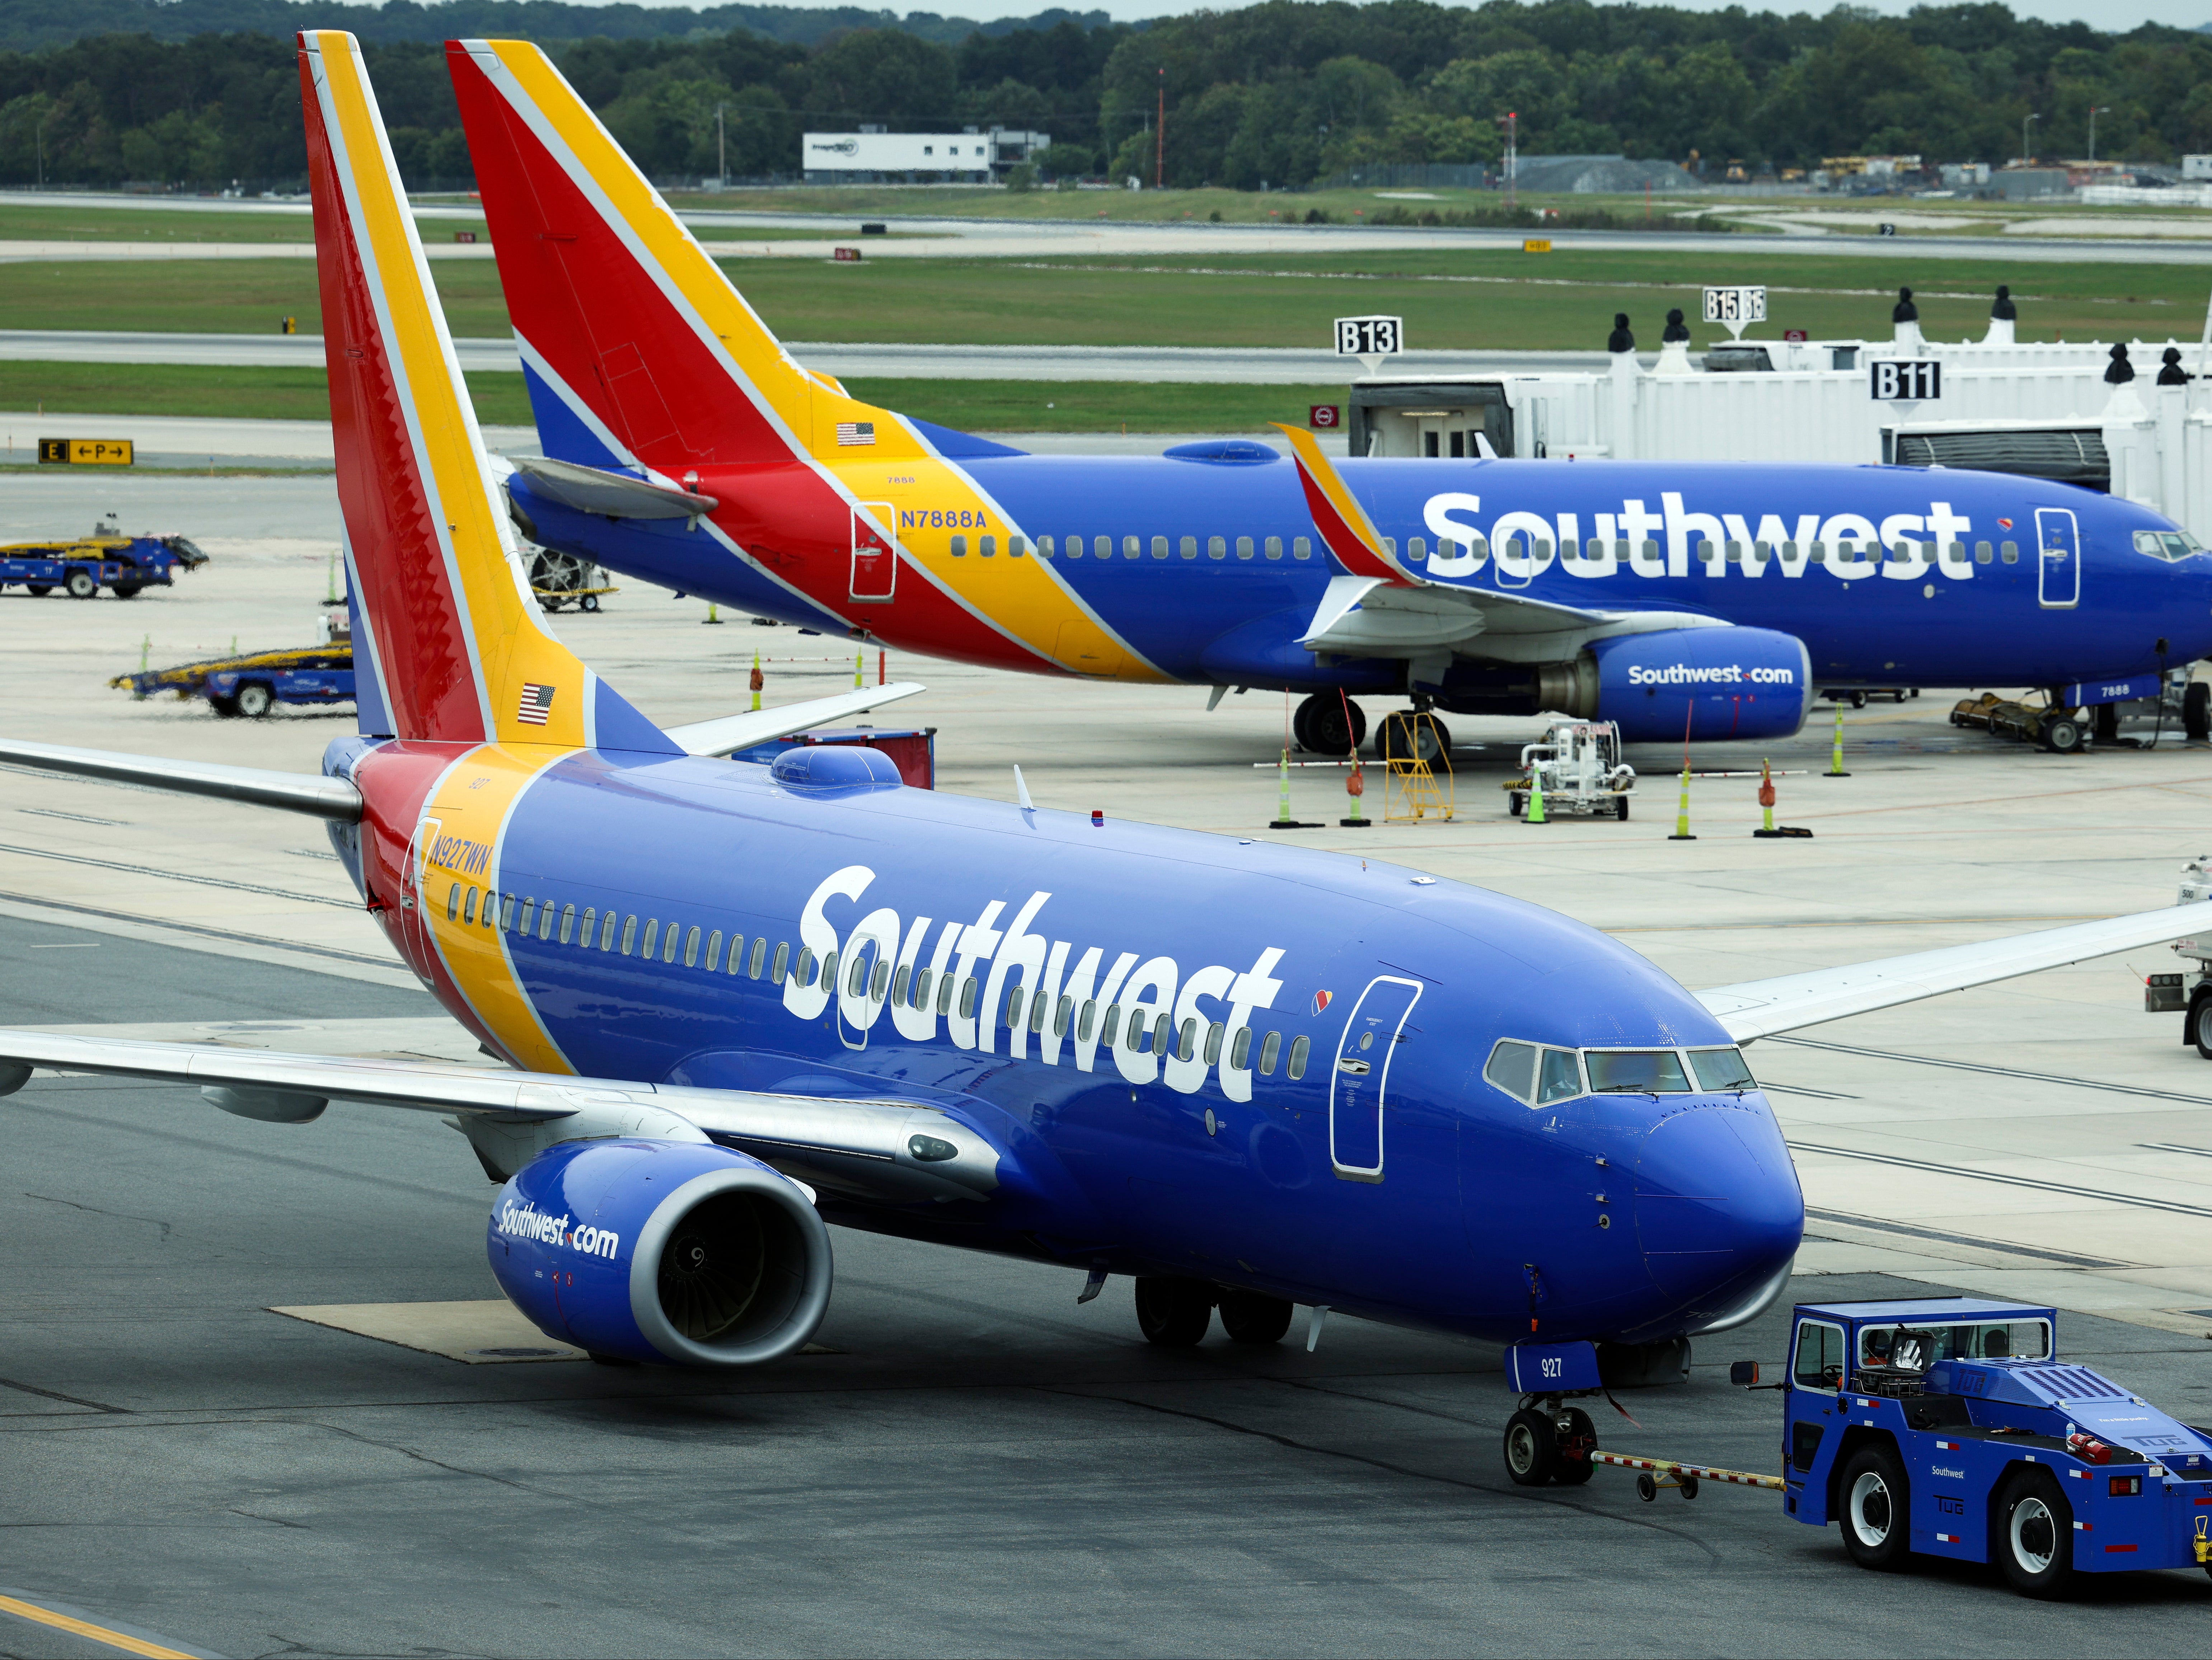 A passenger boarding a Southwest Airlines flight in Dallas, Texas, assaulted an employee on 13 November, 2021, sending her to the hospital.